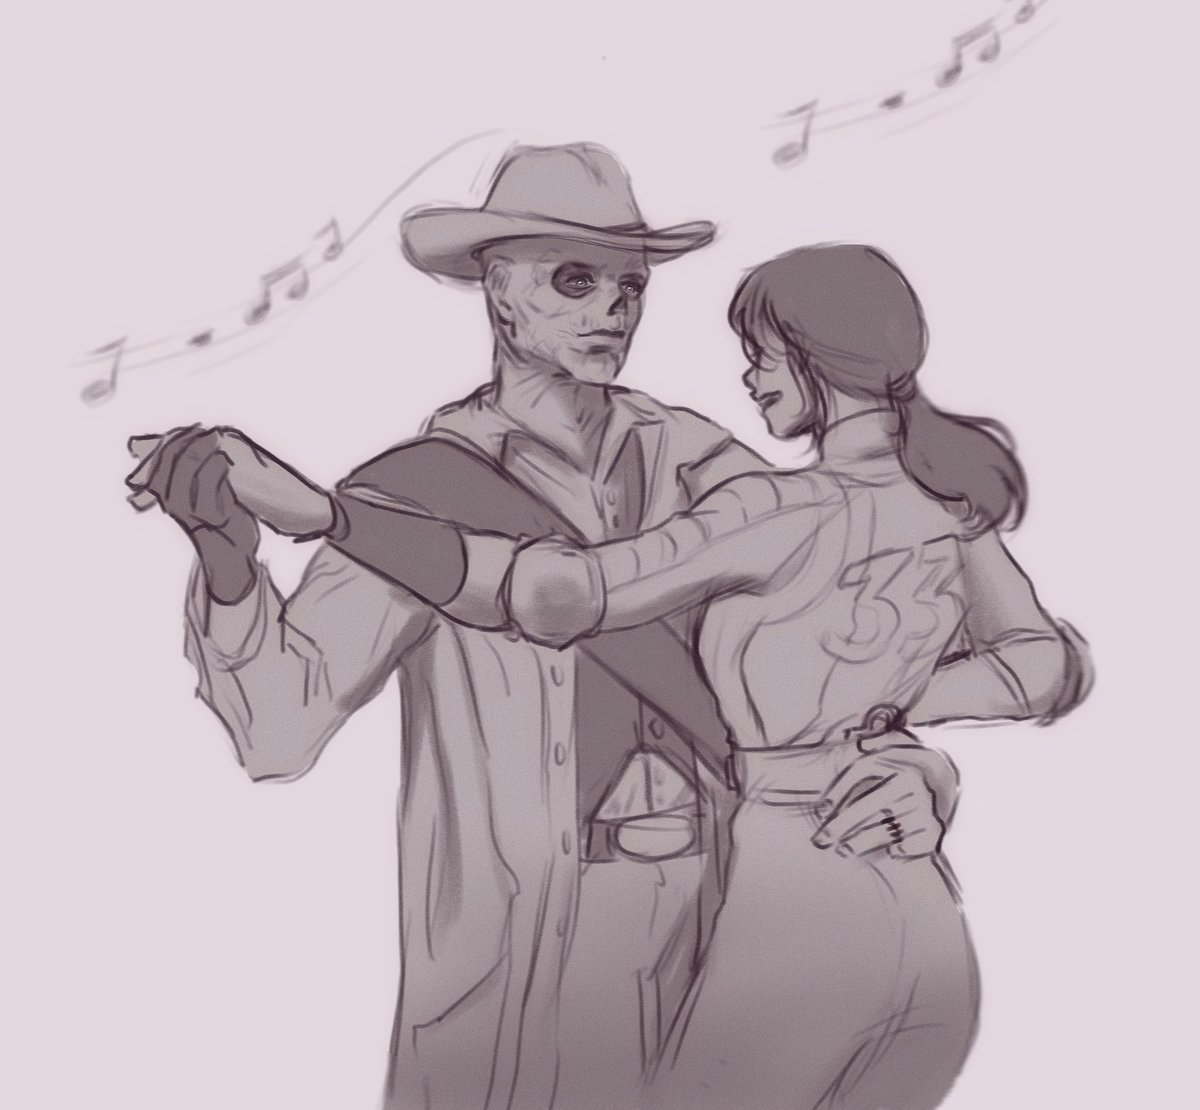 I've lost all ambition
For worldly acclaim
I just want to be the one you love 🎶

(Lucy x The Ghoul)
#FalloutPrime #CooperHoward